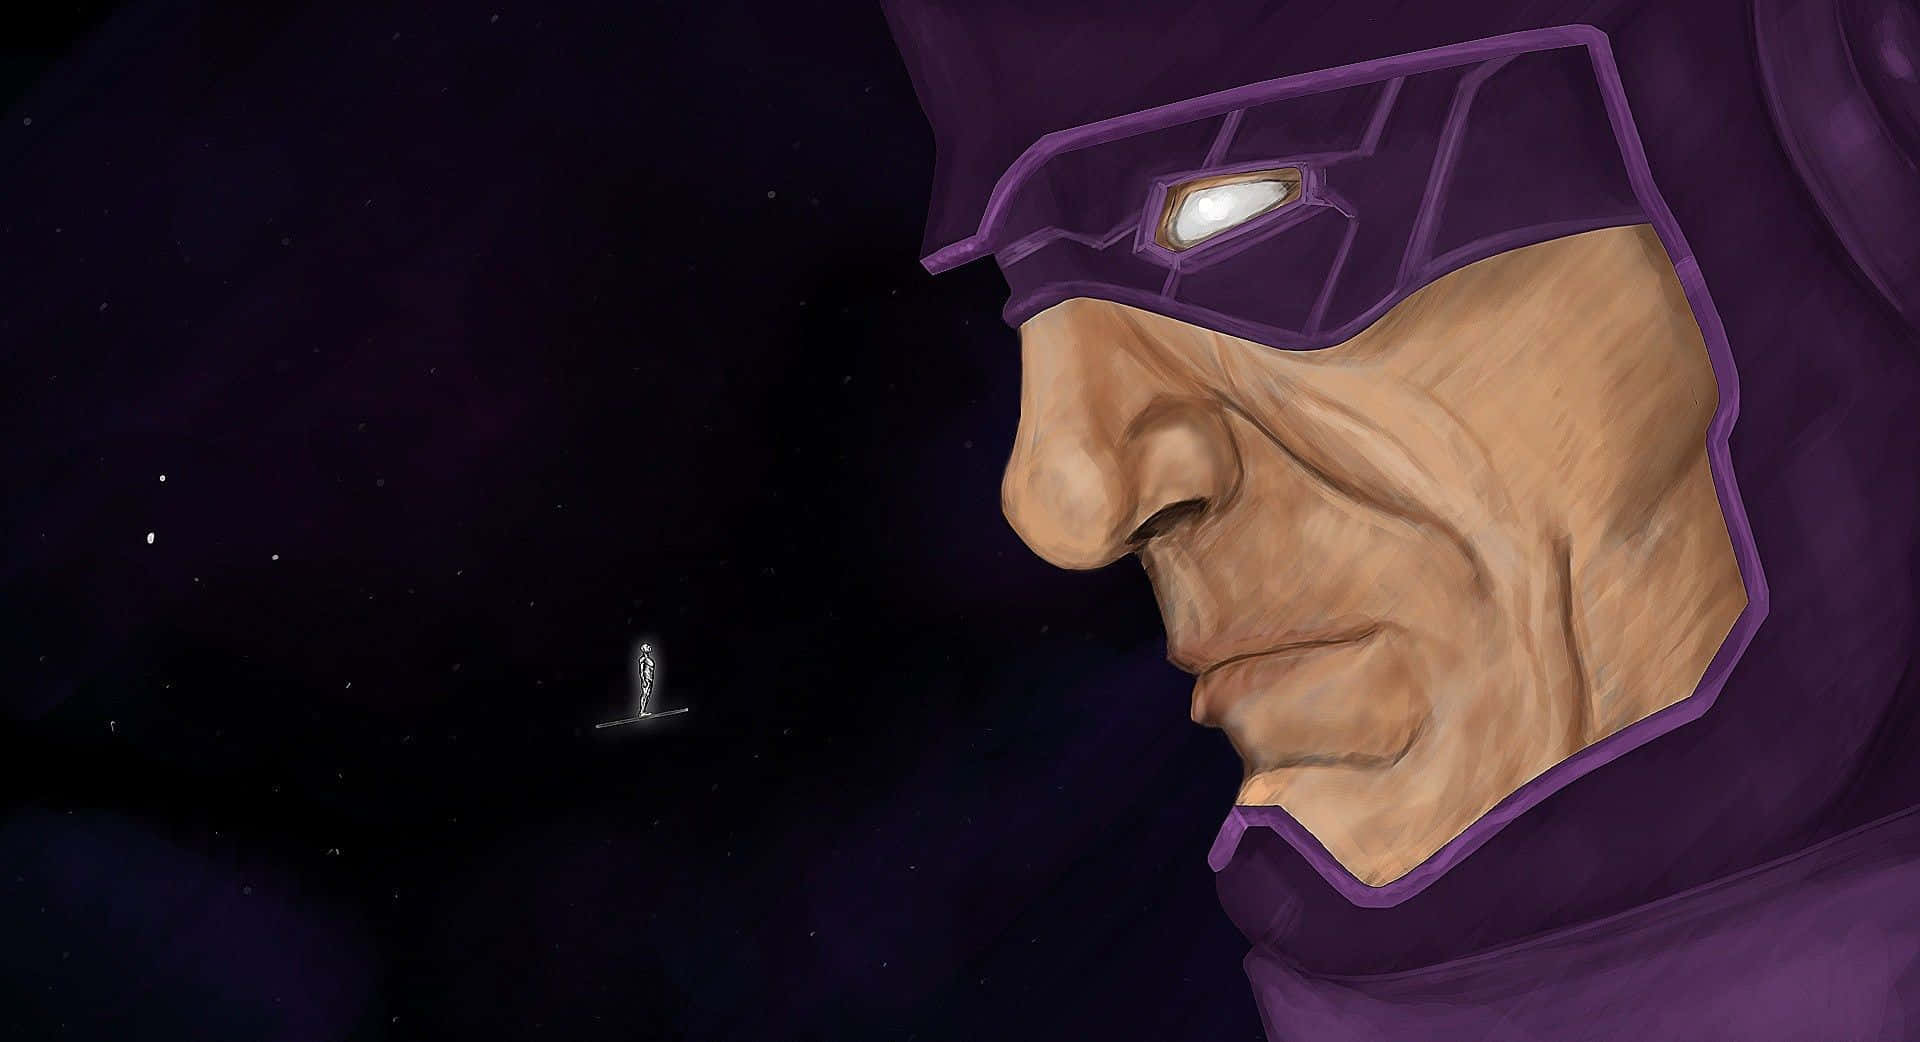 Galactus, the Devourer of Worlds, rising above planets Wallpaper